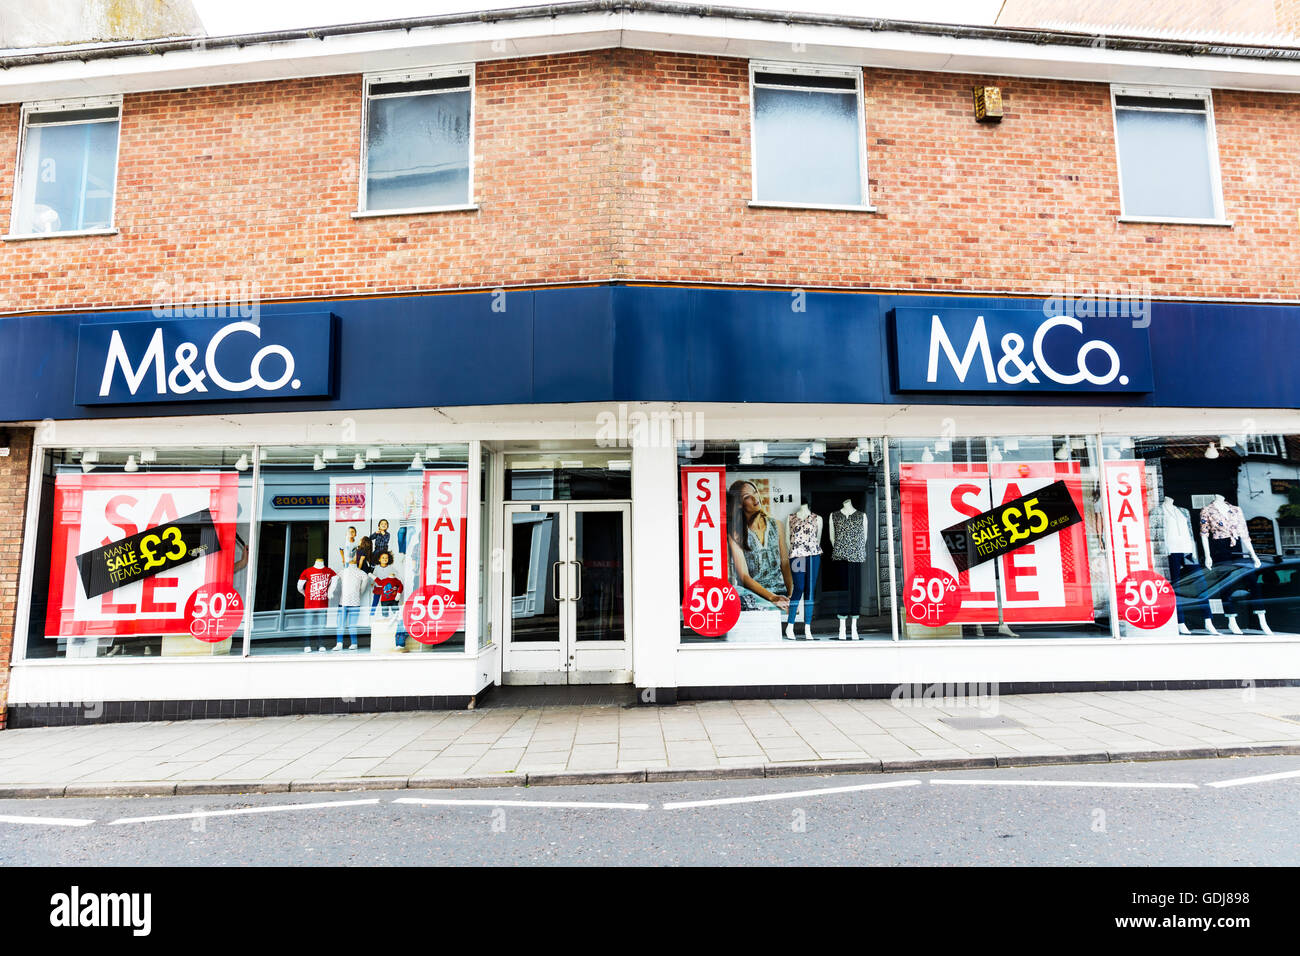 M&Co shop store sign signs clothes shops stores high streeet building exterior sale sales UK England Stock Photo